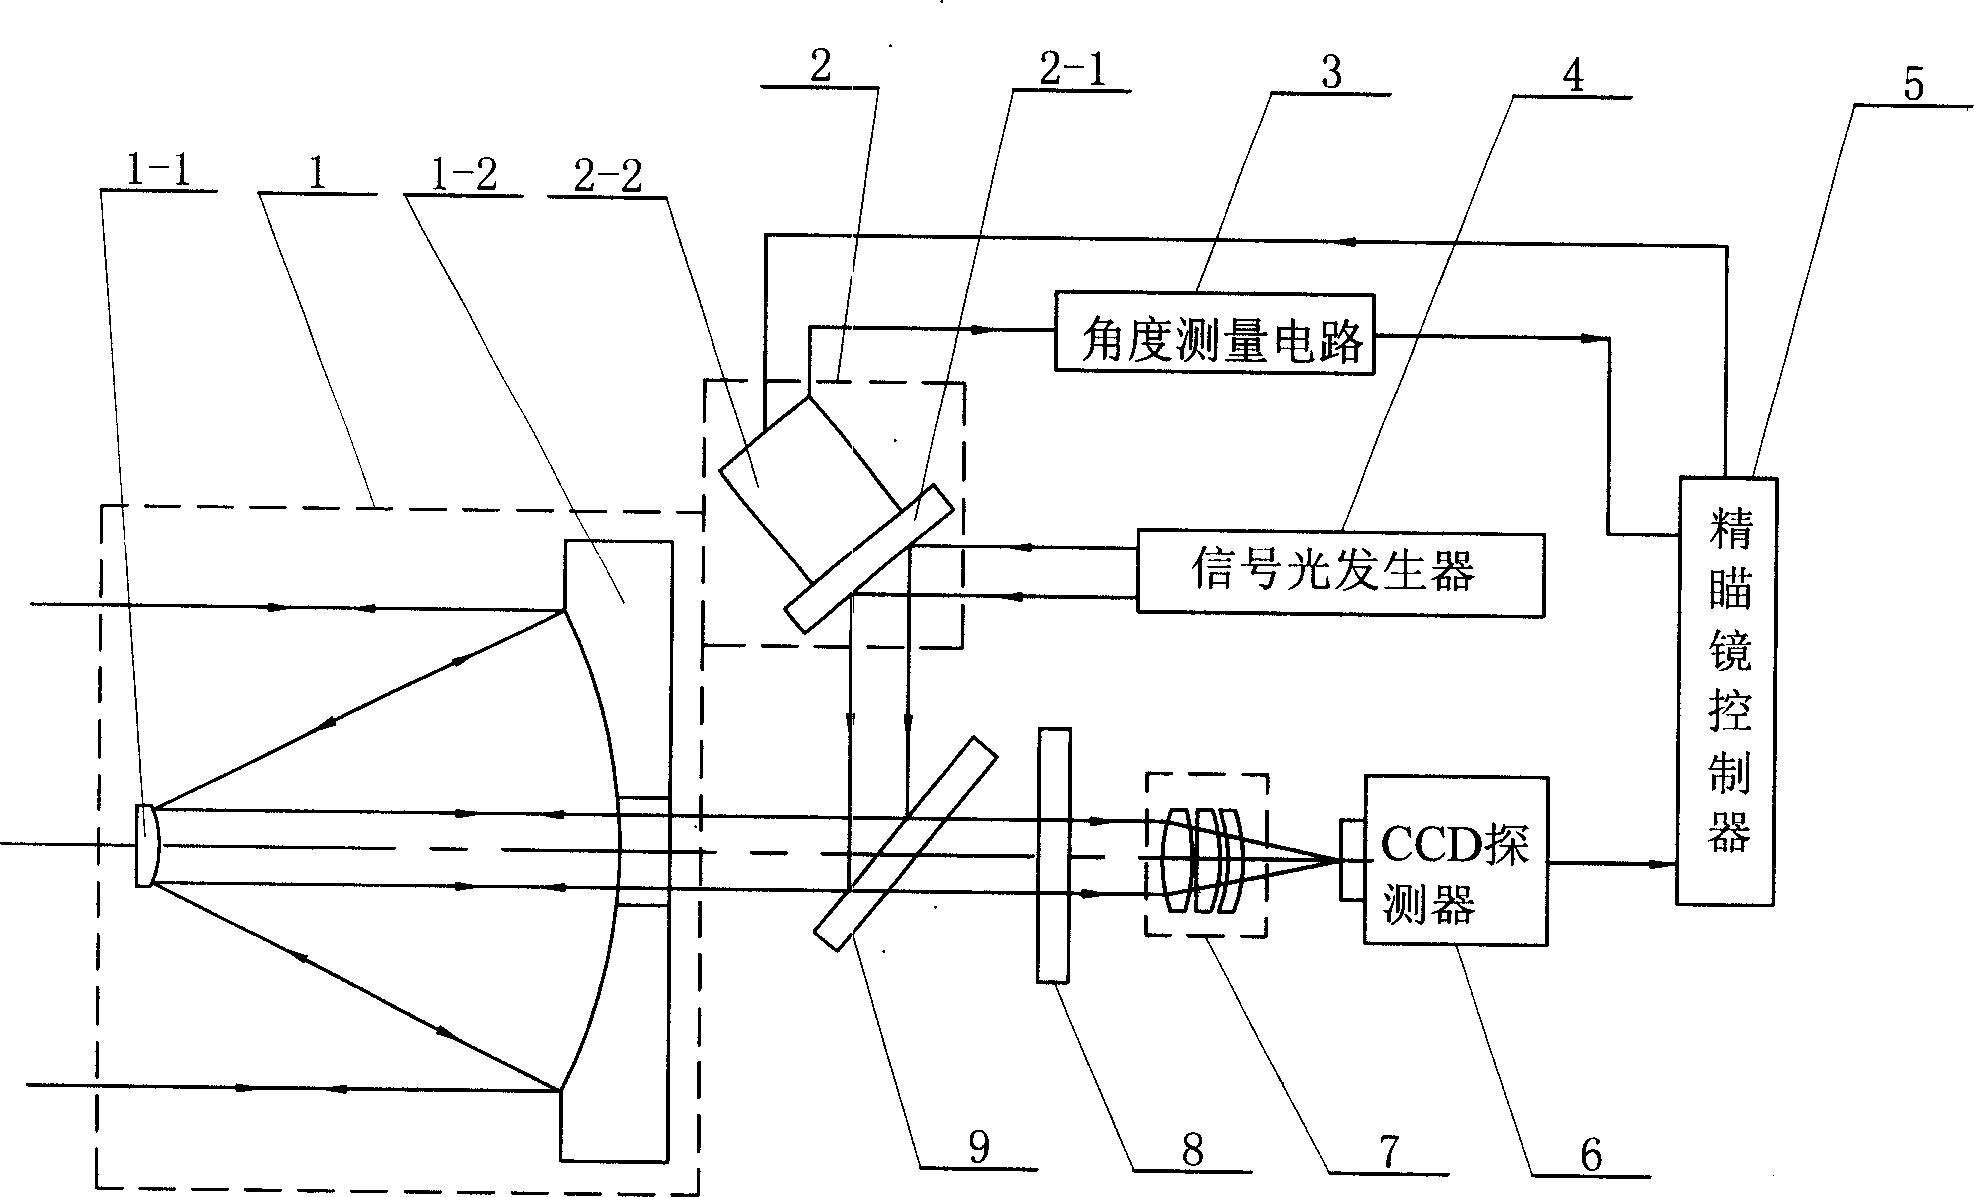 Composite feedback control vibration compensating system based on CCD